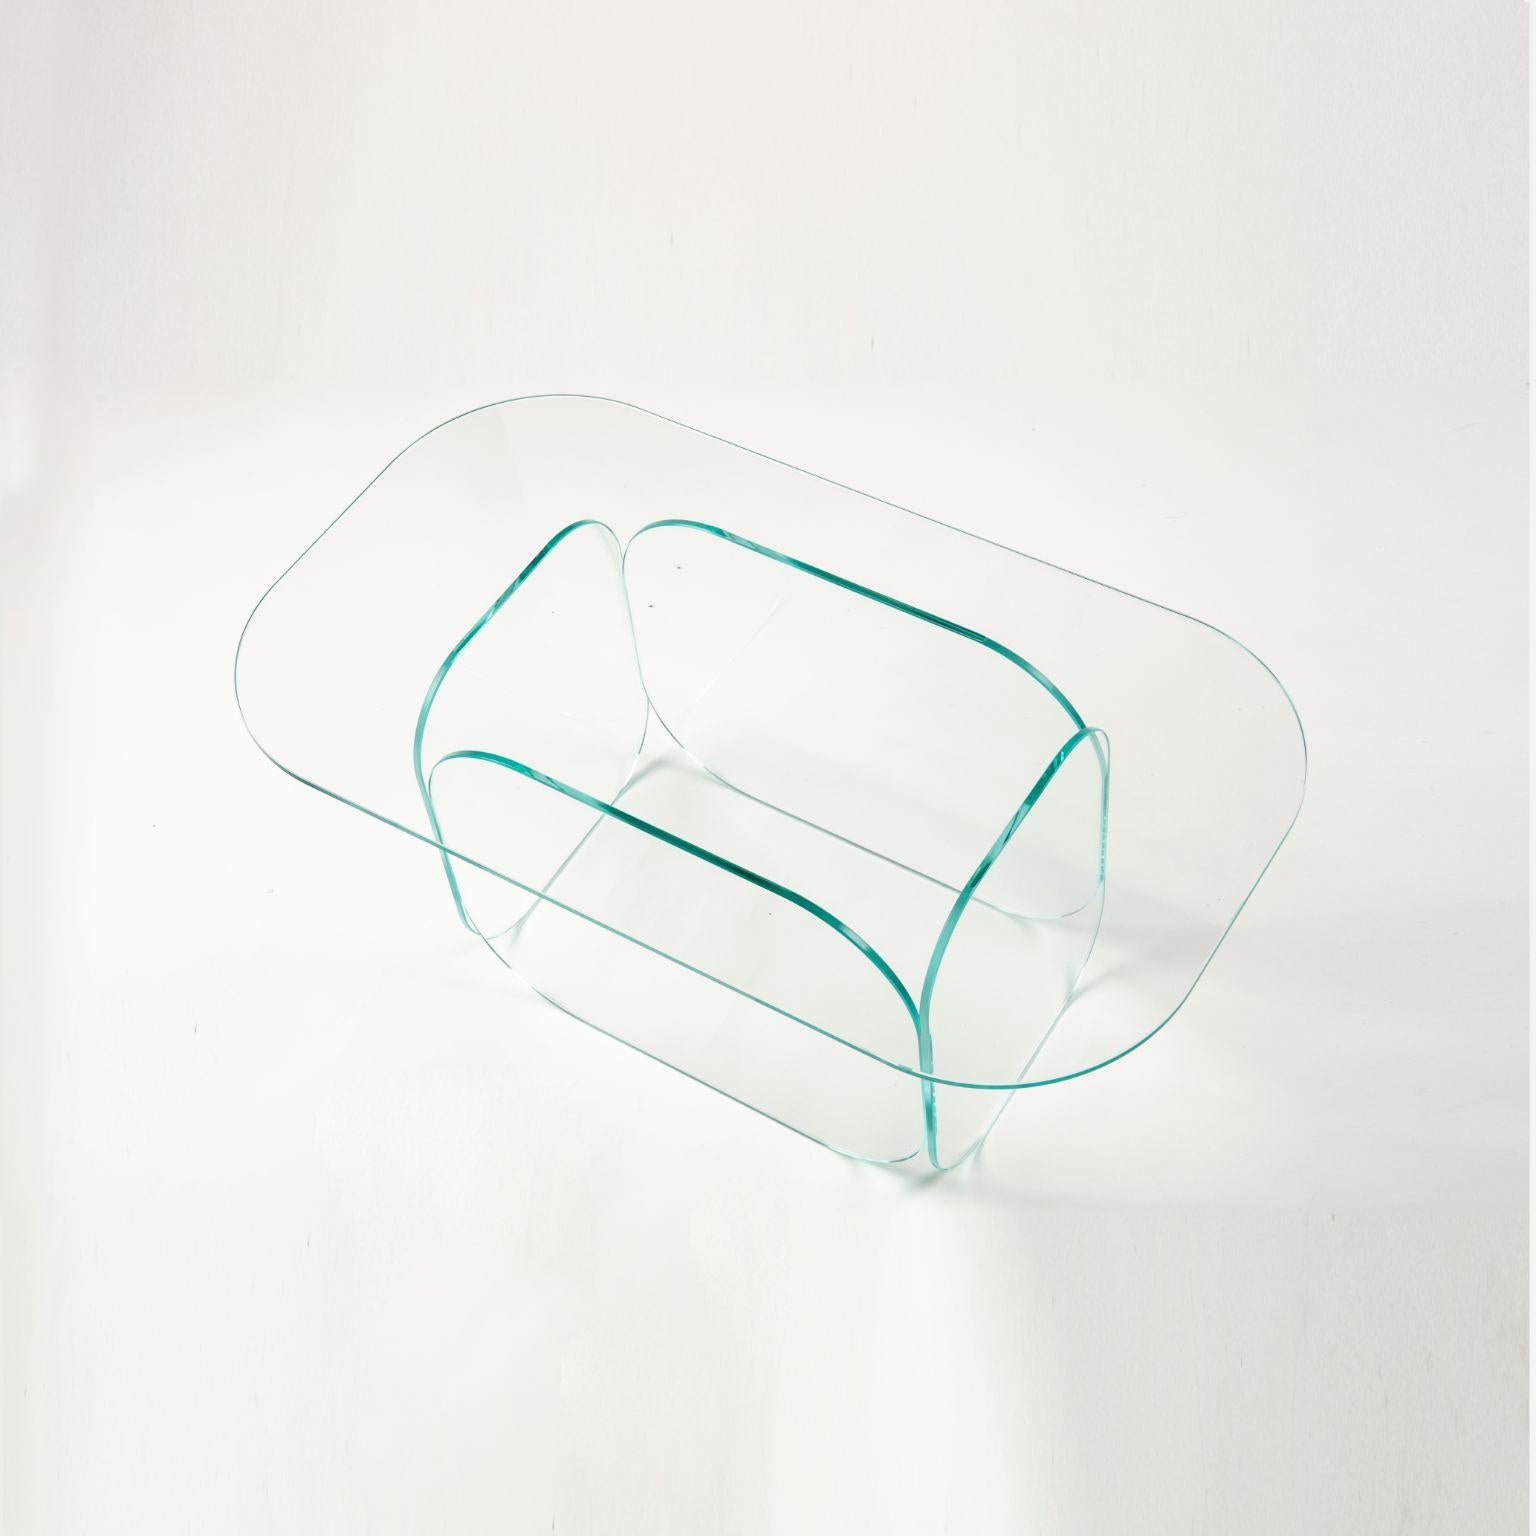 Candy Clear glass coffee table sculpted by Studio-Chacha
Dimensions: 45 x 80 x 40 cm
Materials: Clear glass 

Studio-Chacha is a high-end art furniture studio founded in 2017 that creates a new aesthetic with an unfamiliar combination of